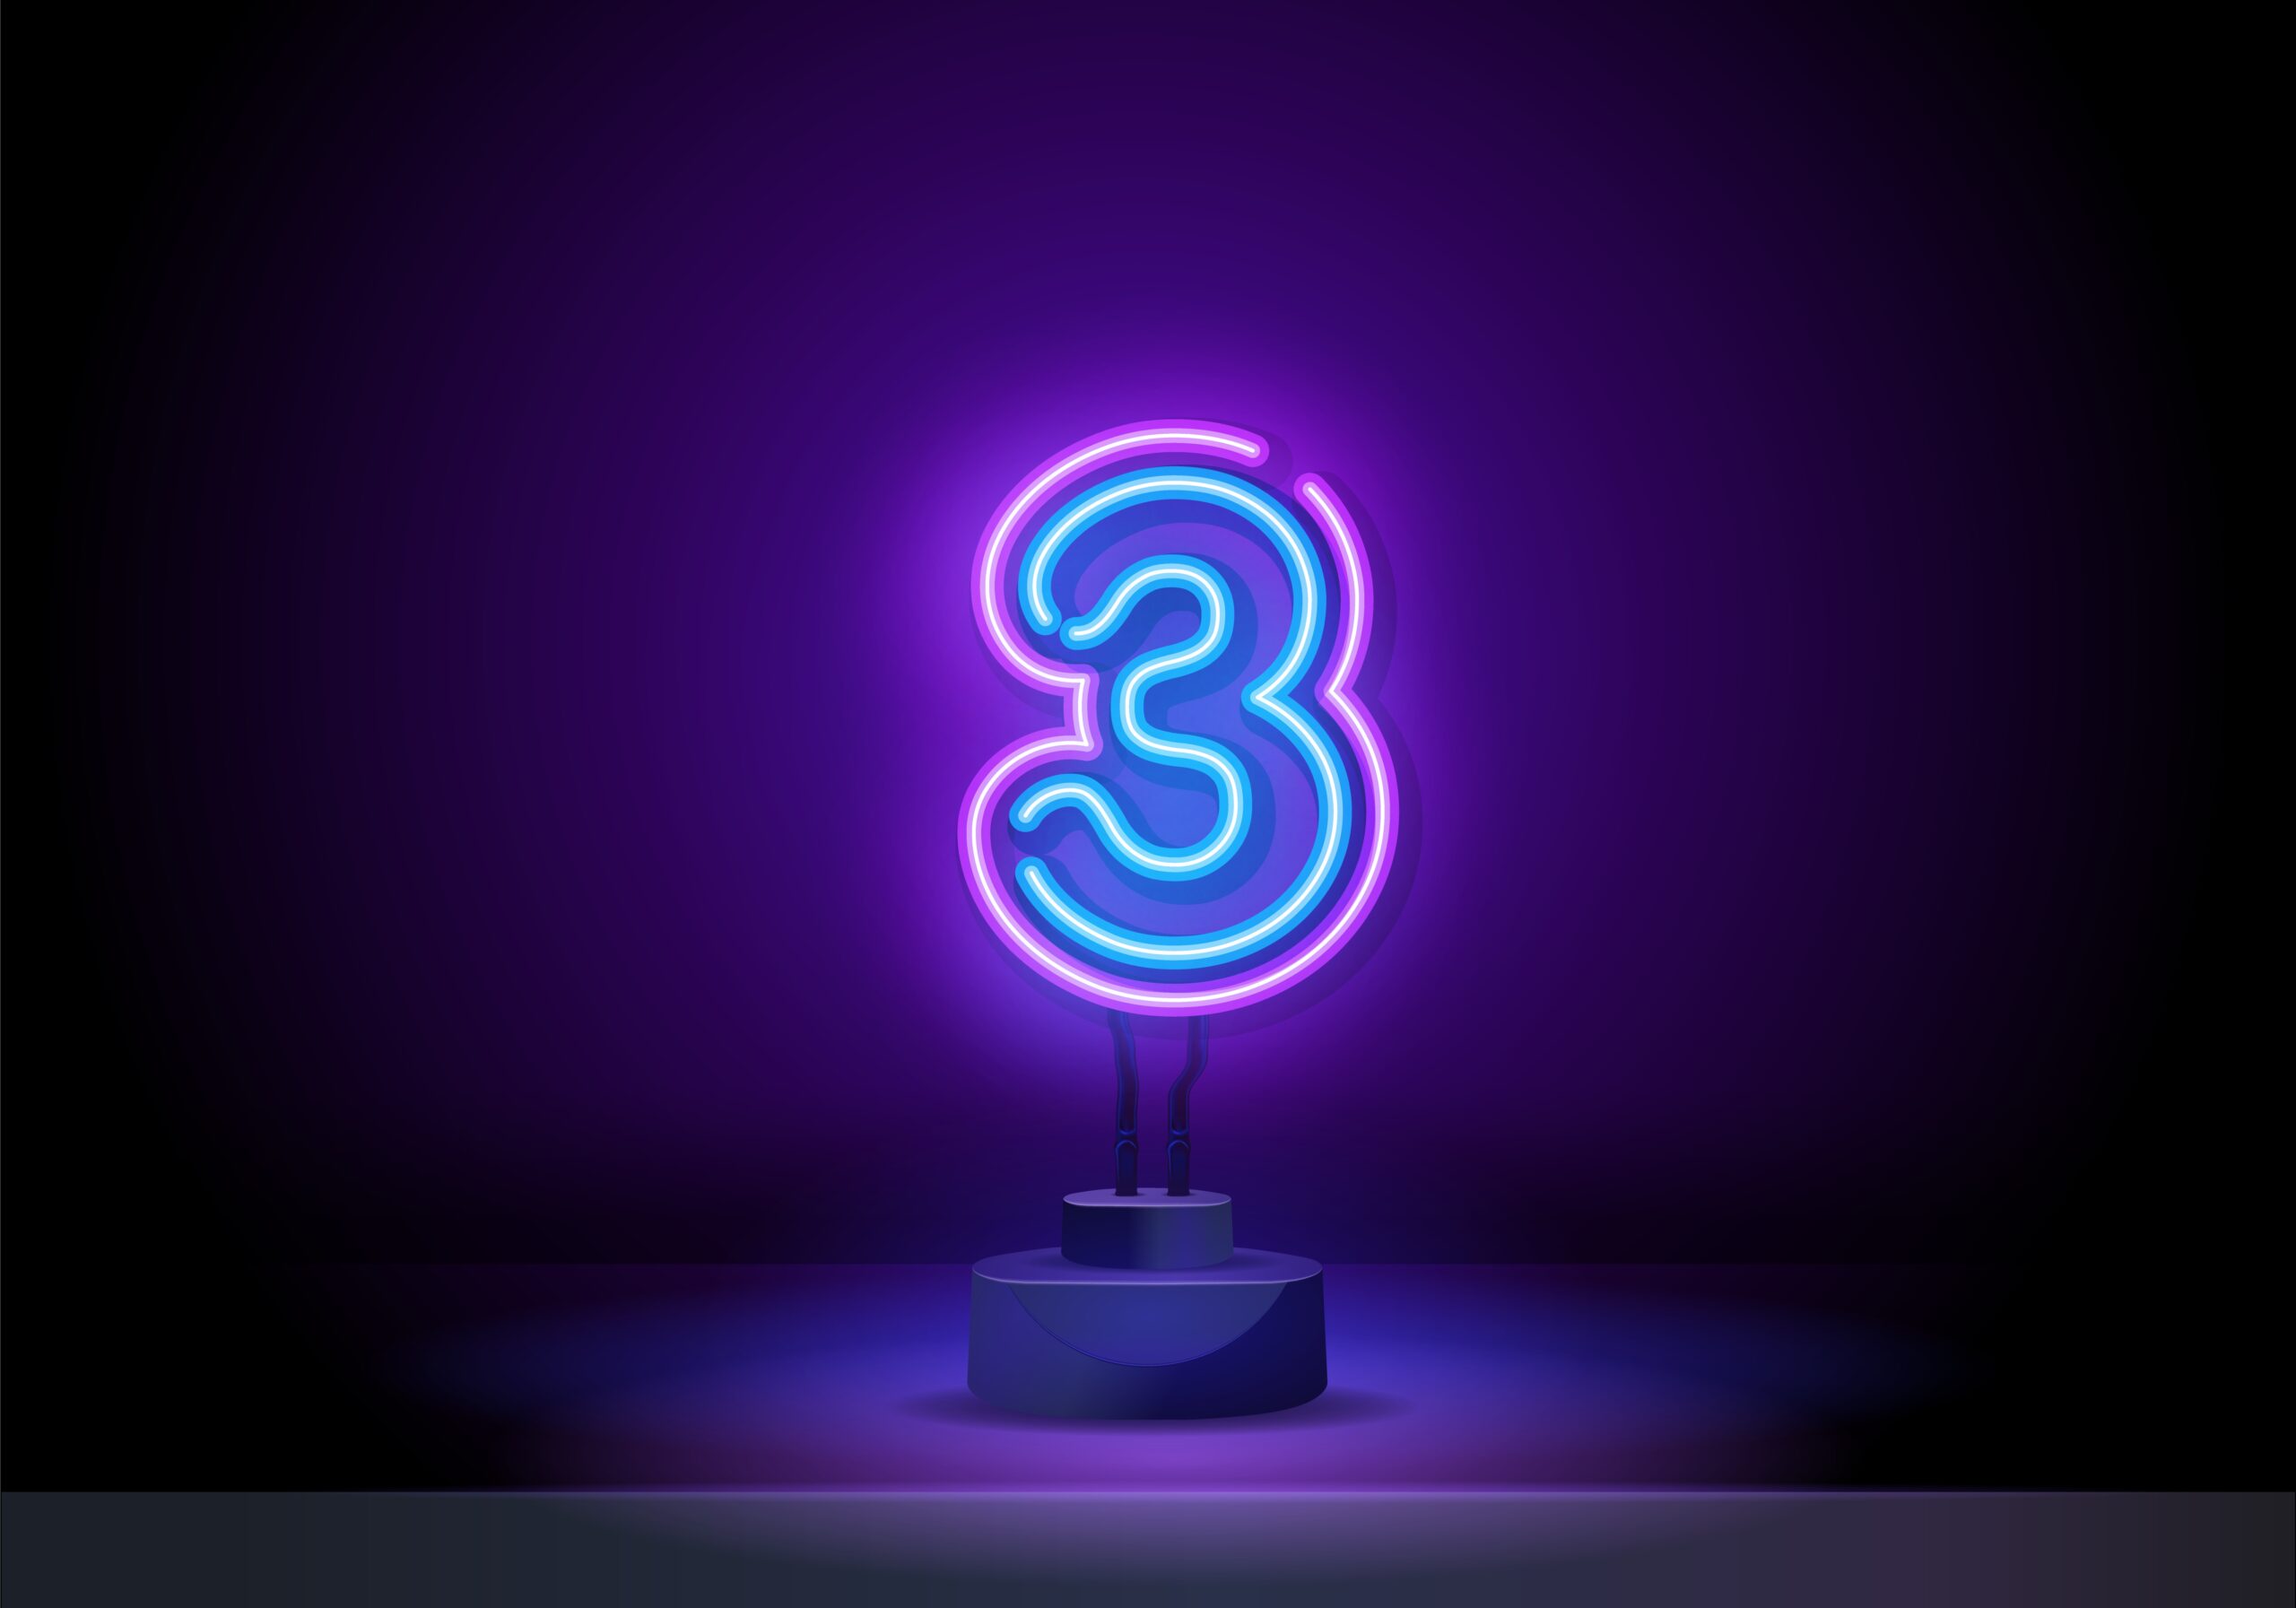 The number 3 created a neon font.